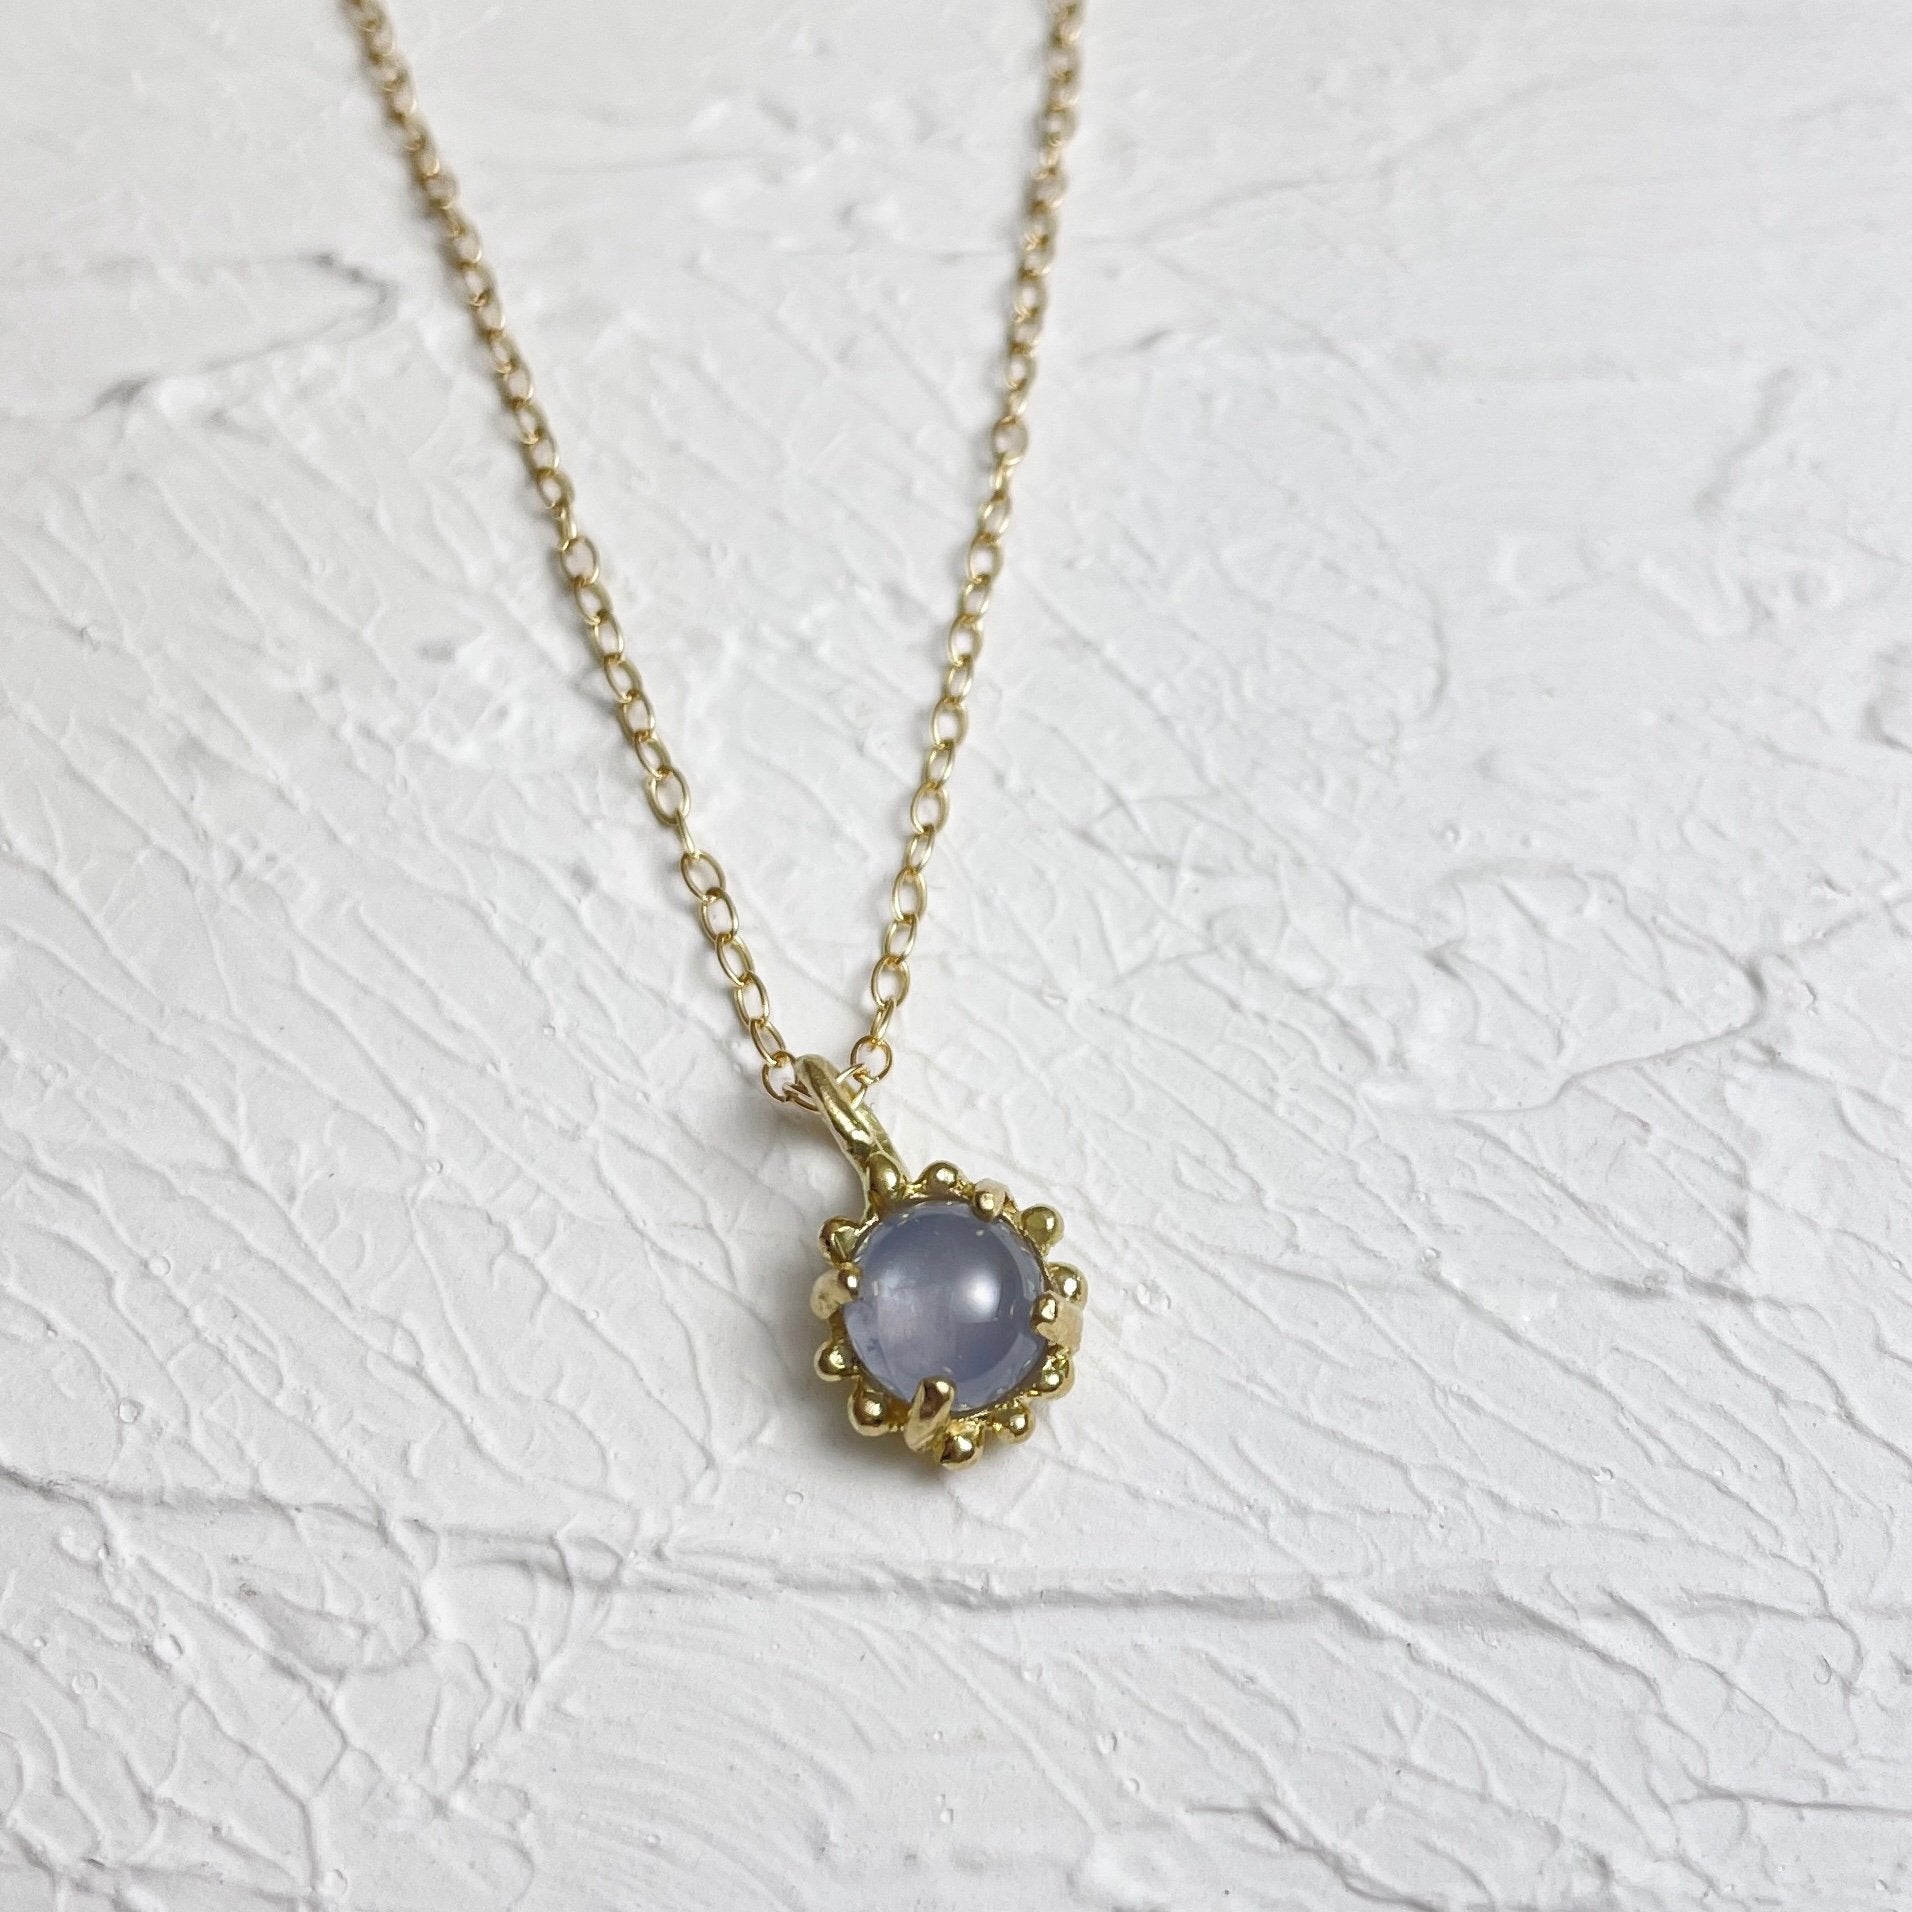 Small Star Sapphire Surrounded by Tiny Dots (18k)